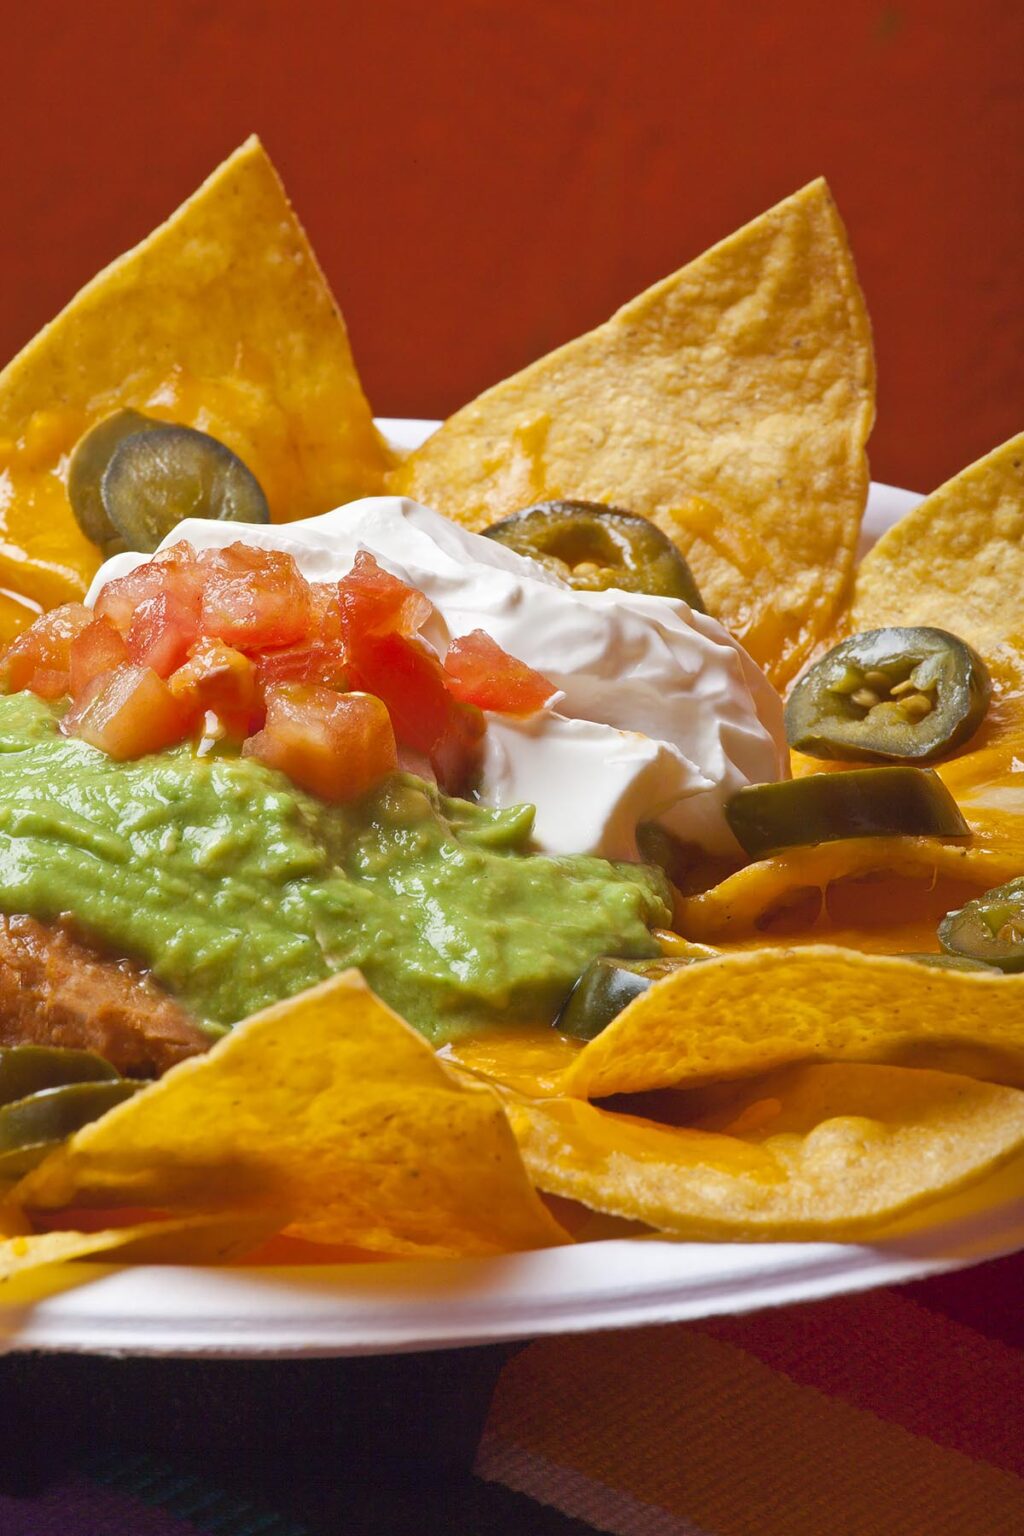 NACHOS with guacamole, sour cream and jalapeno peppers